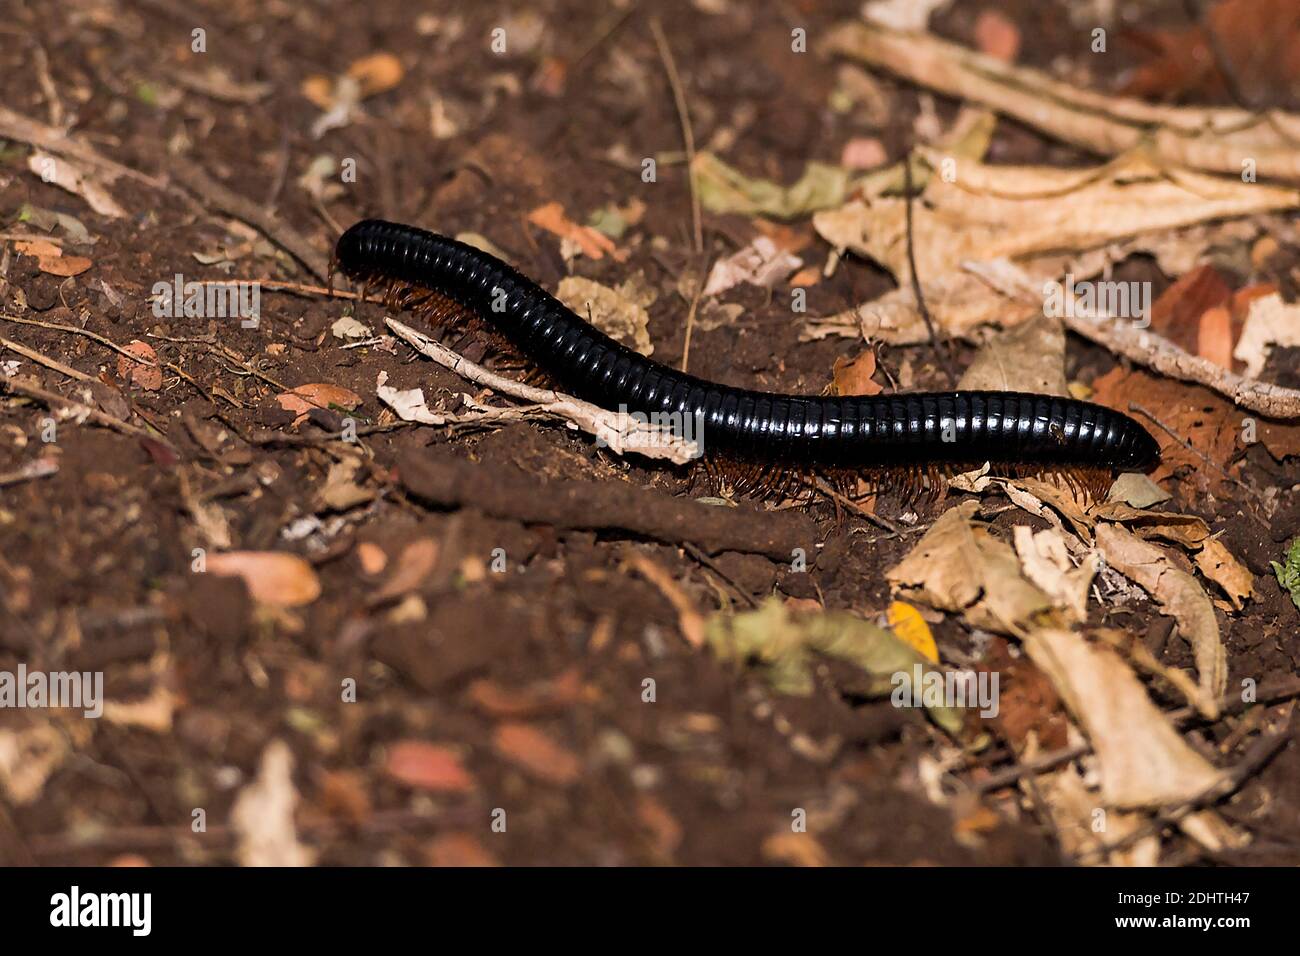 Giant millipede (possibly Archispirostreptus sp.) from Berenty, southern Madagascar. Stock Photo